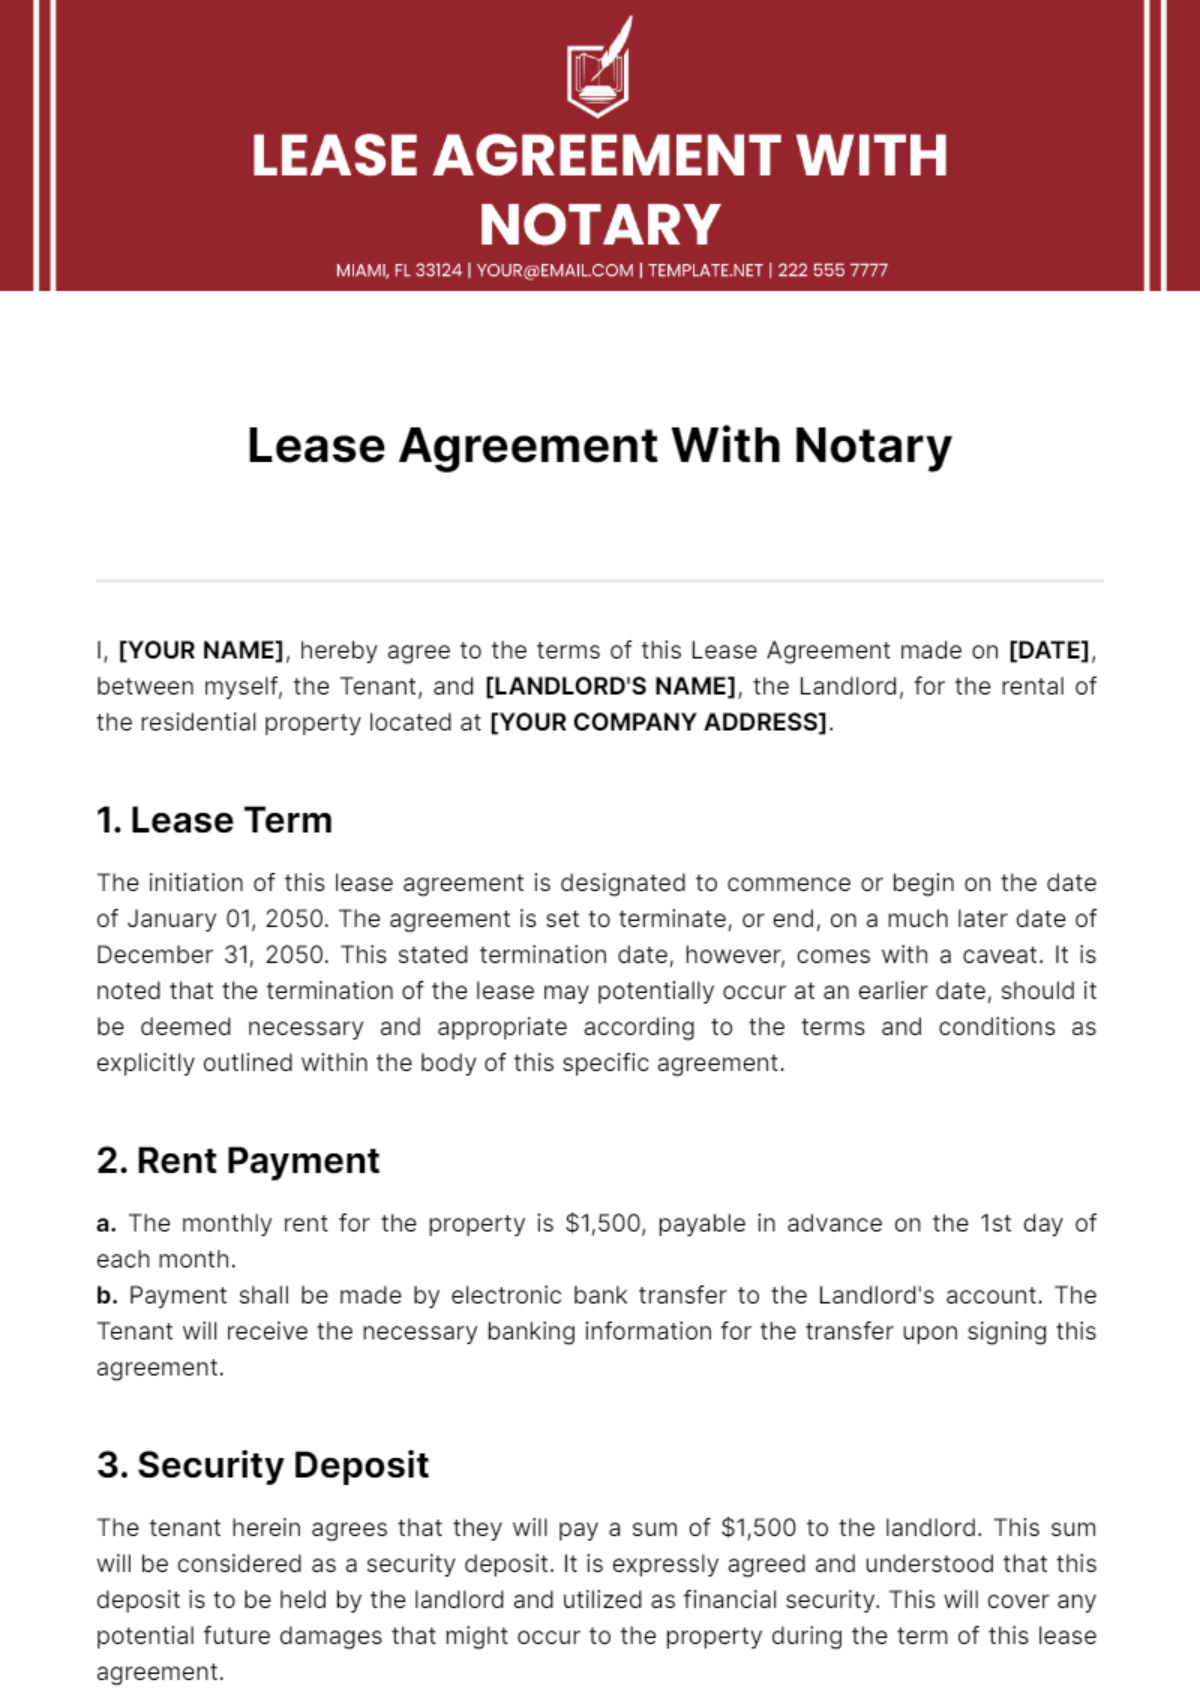 Lease Agreement With Notary Template